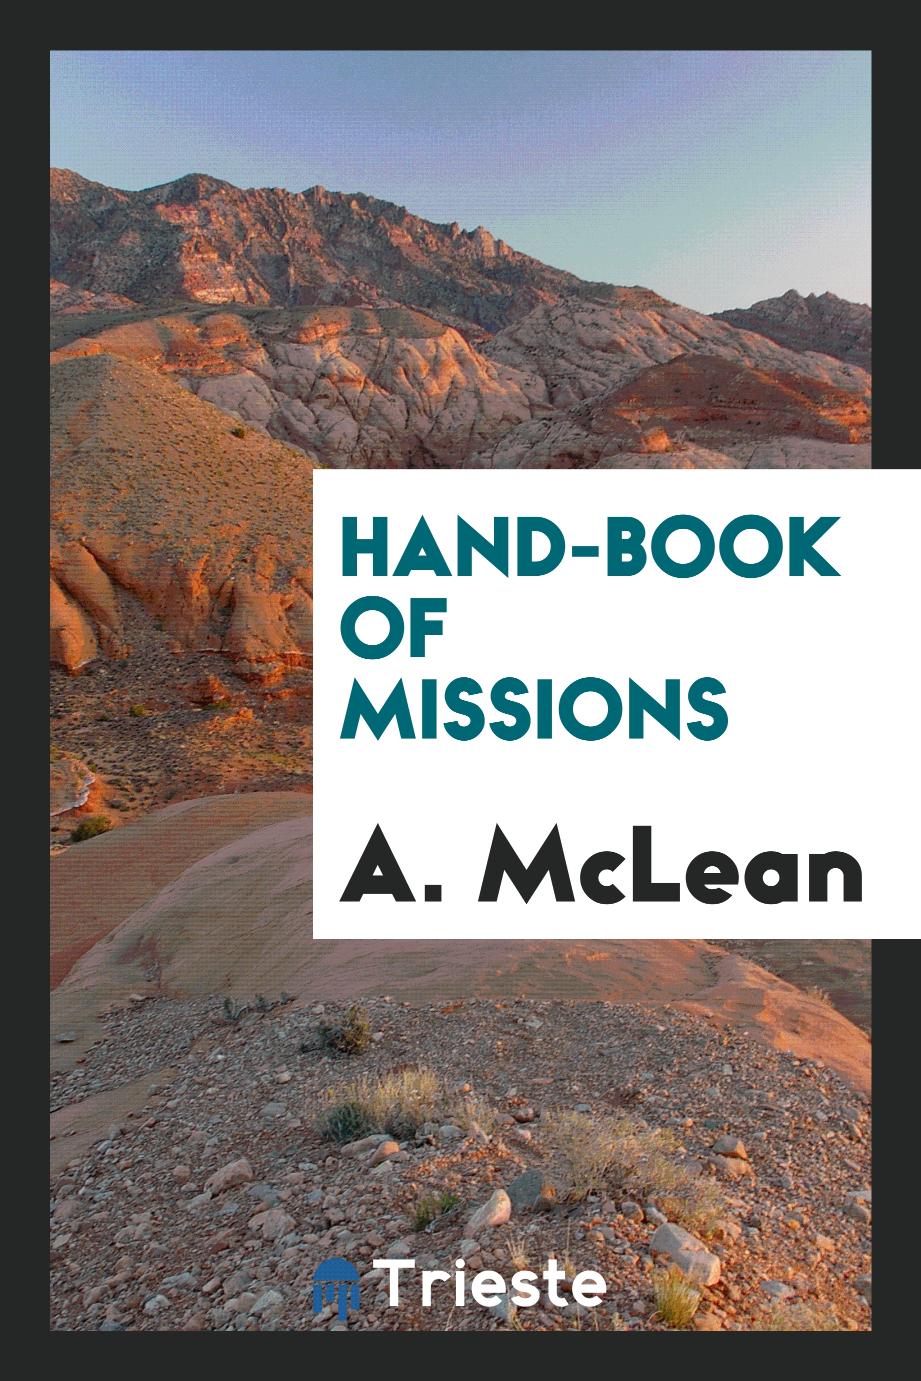 Hand-book of missions